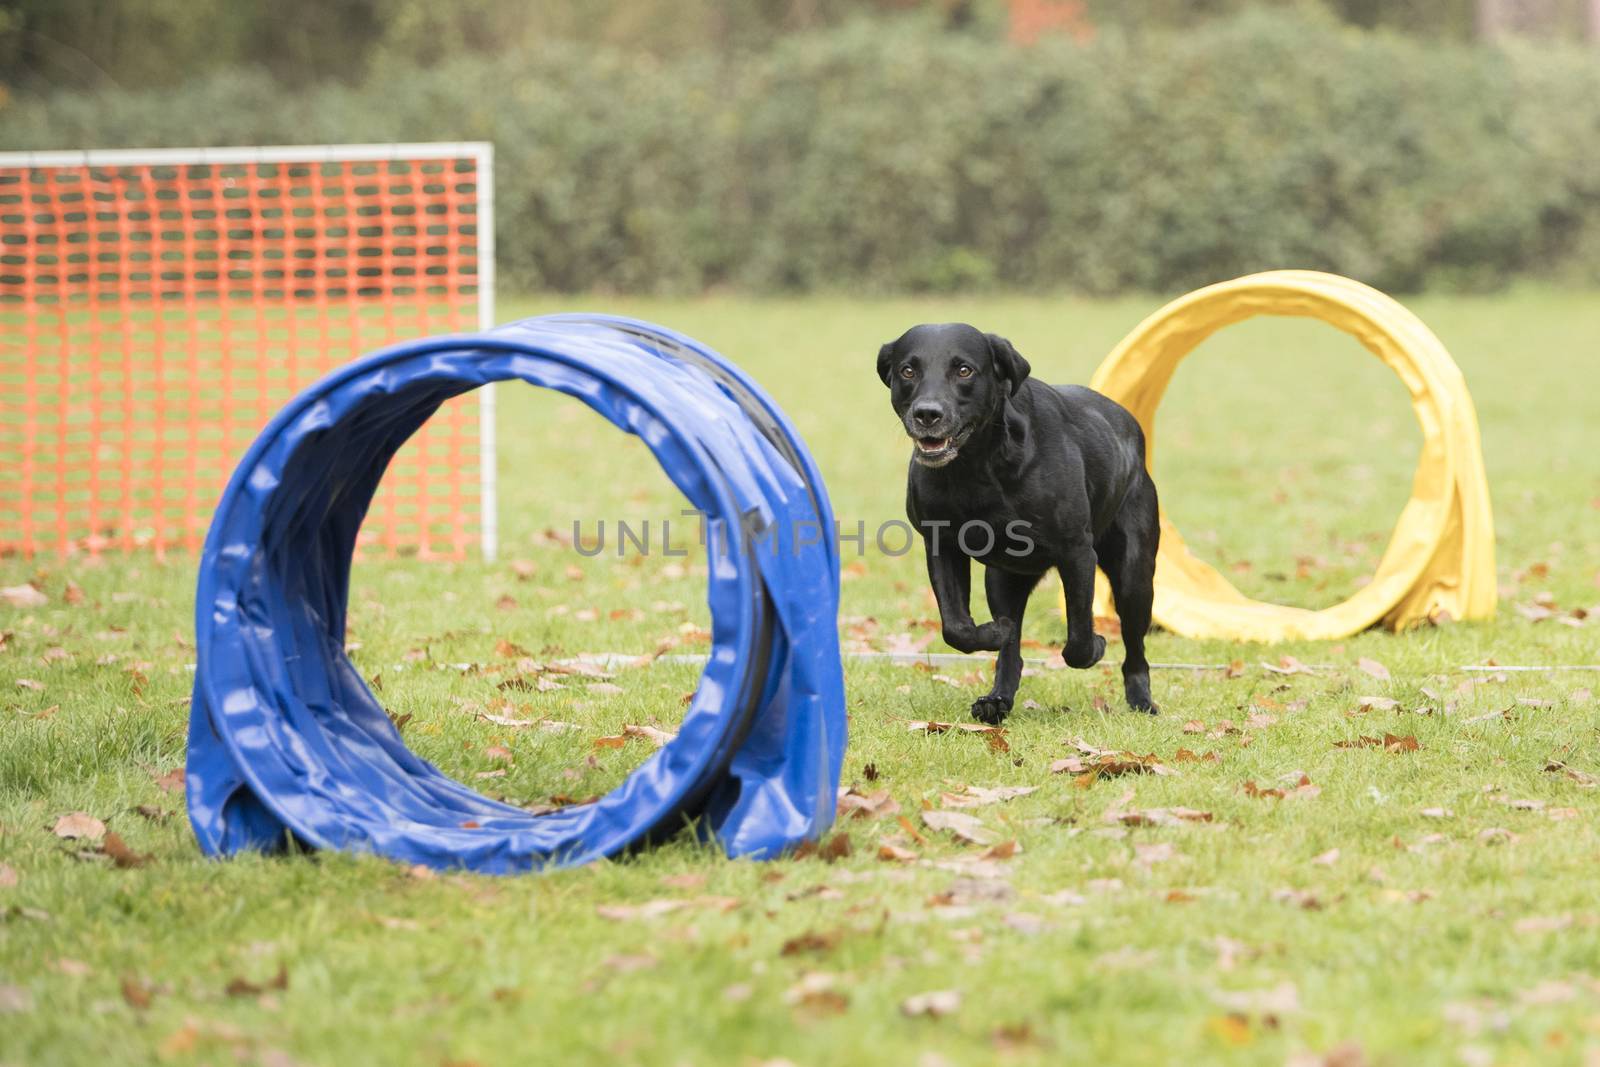 Dog, Labrador Retriever, running in agility competition by avanheertum